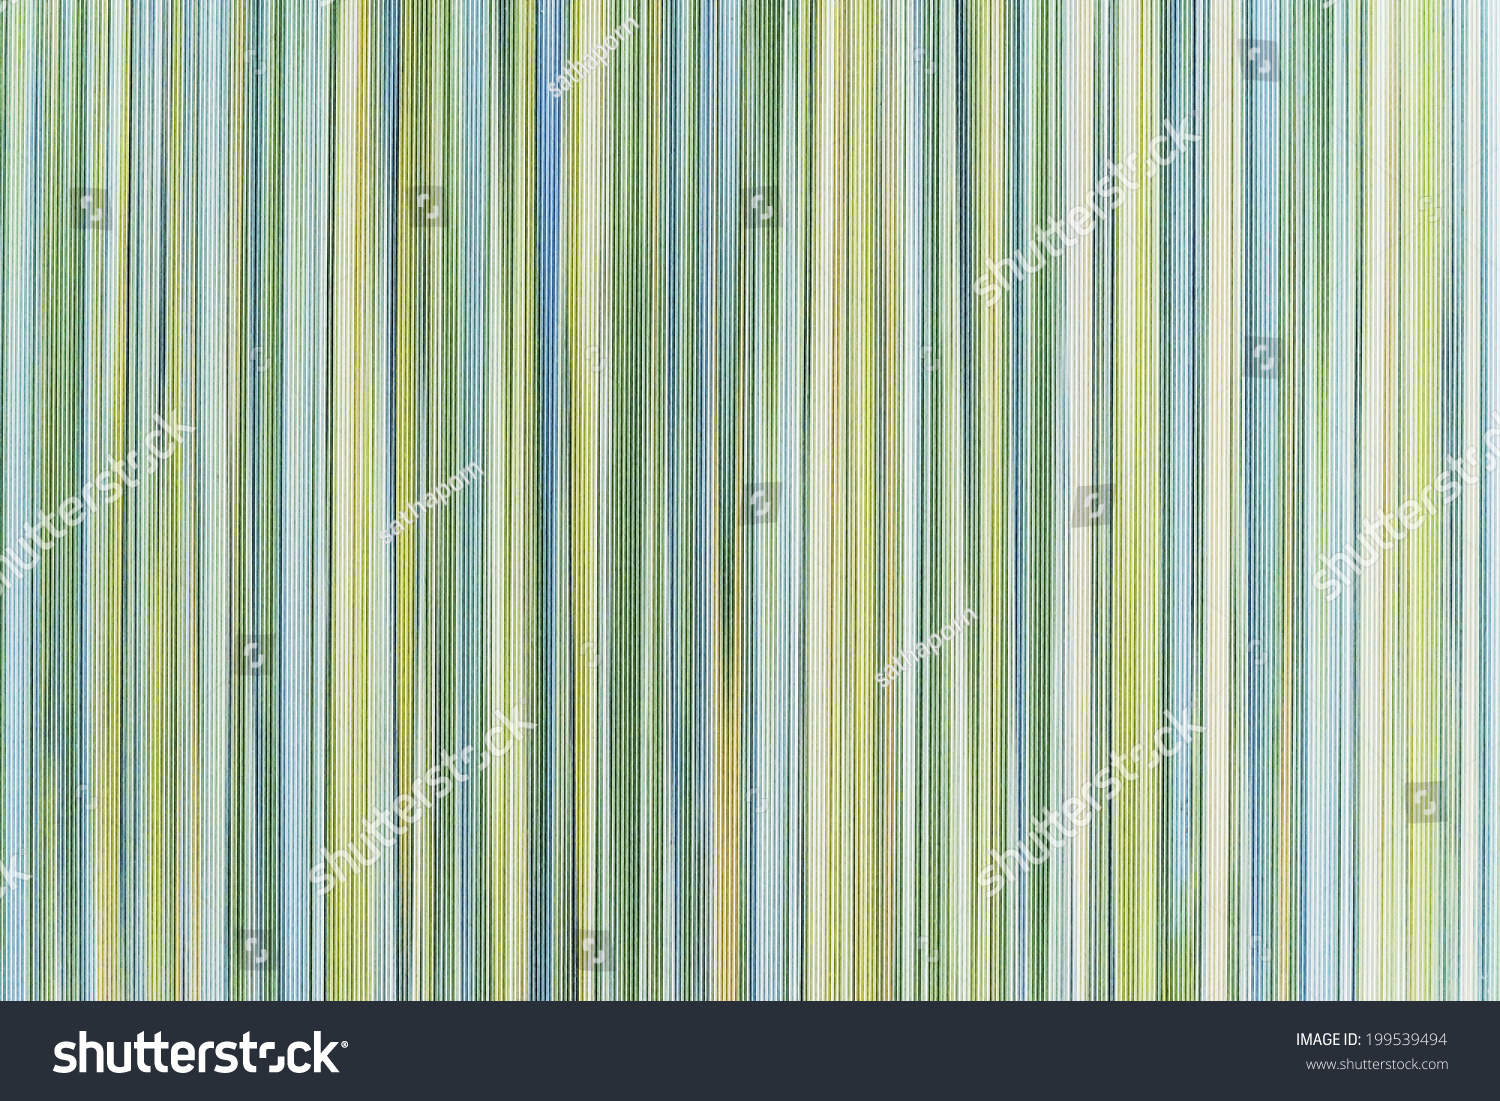 Background Of Pinstripes In Shades Of Green Stock Photo 199539494